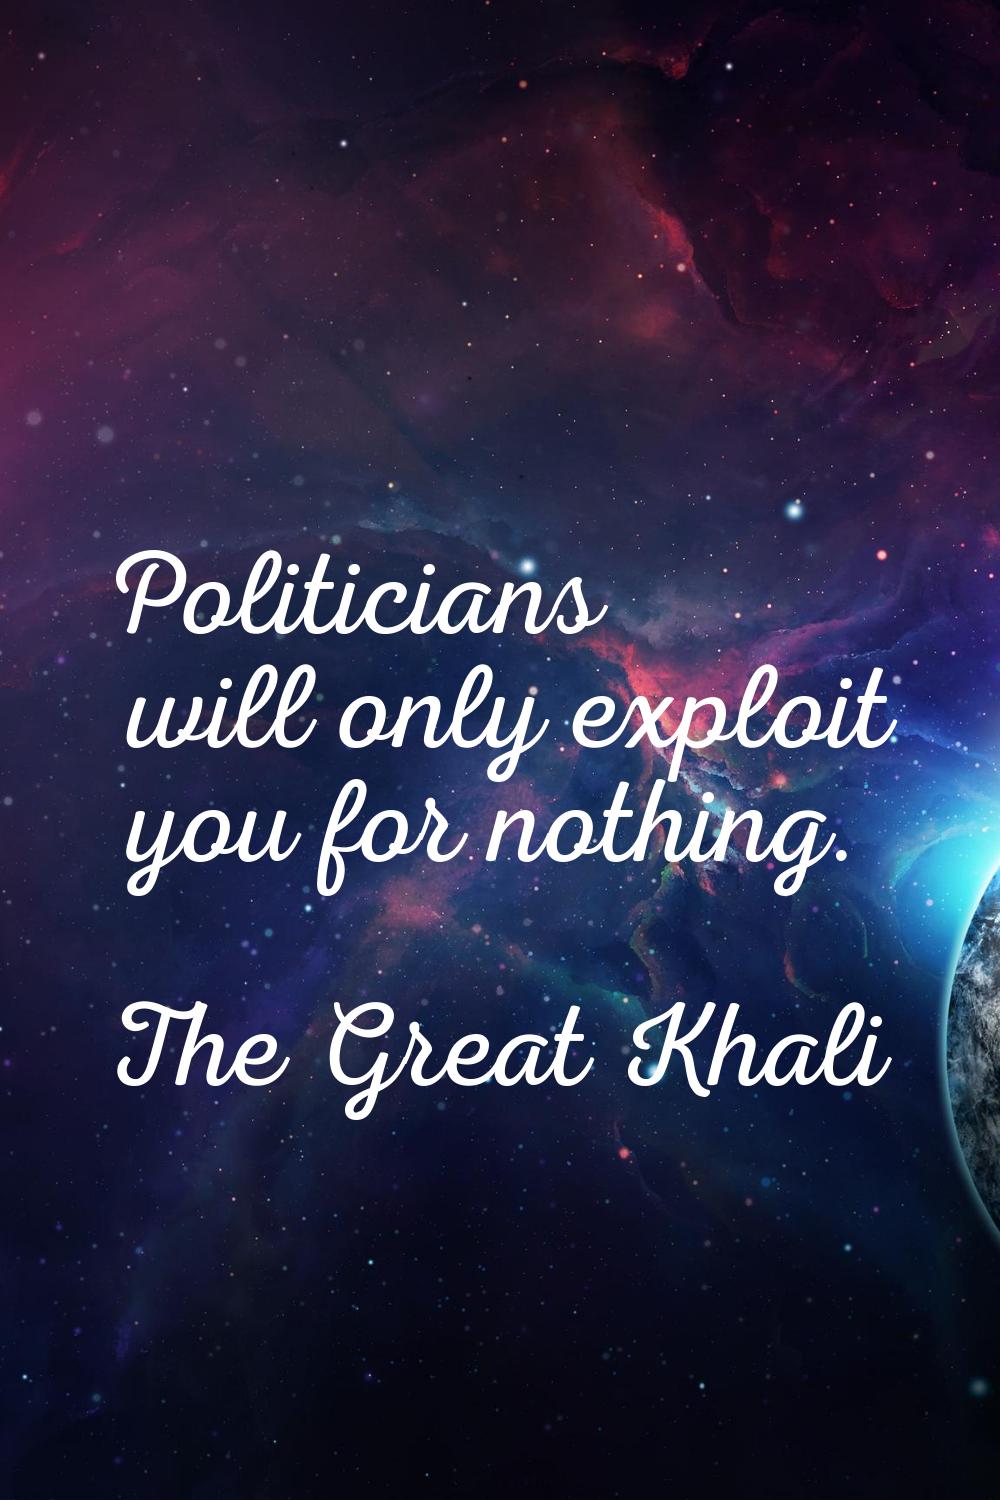 Politicians will only exploit you for nothing.